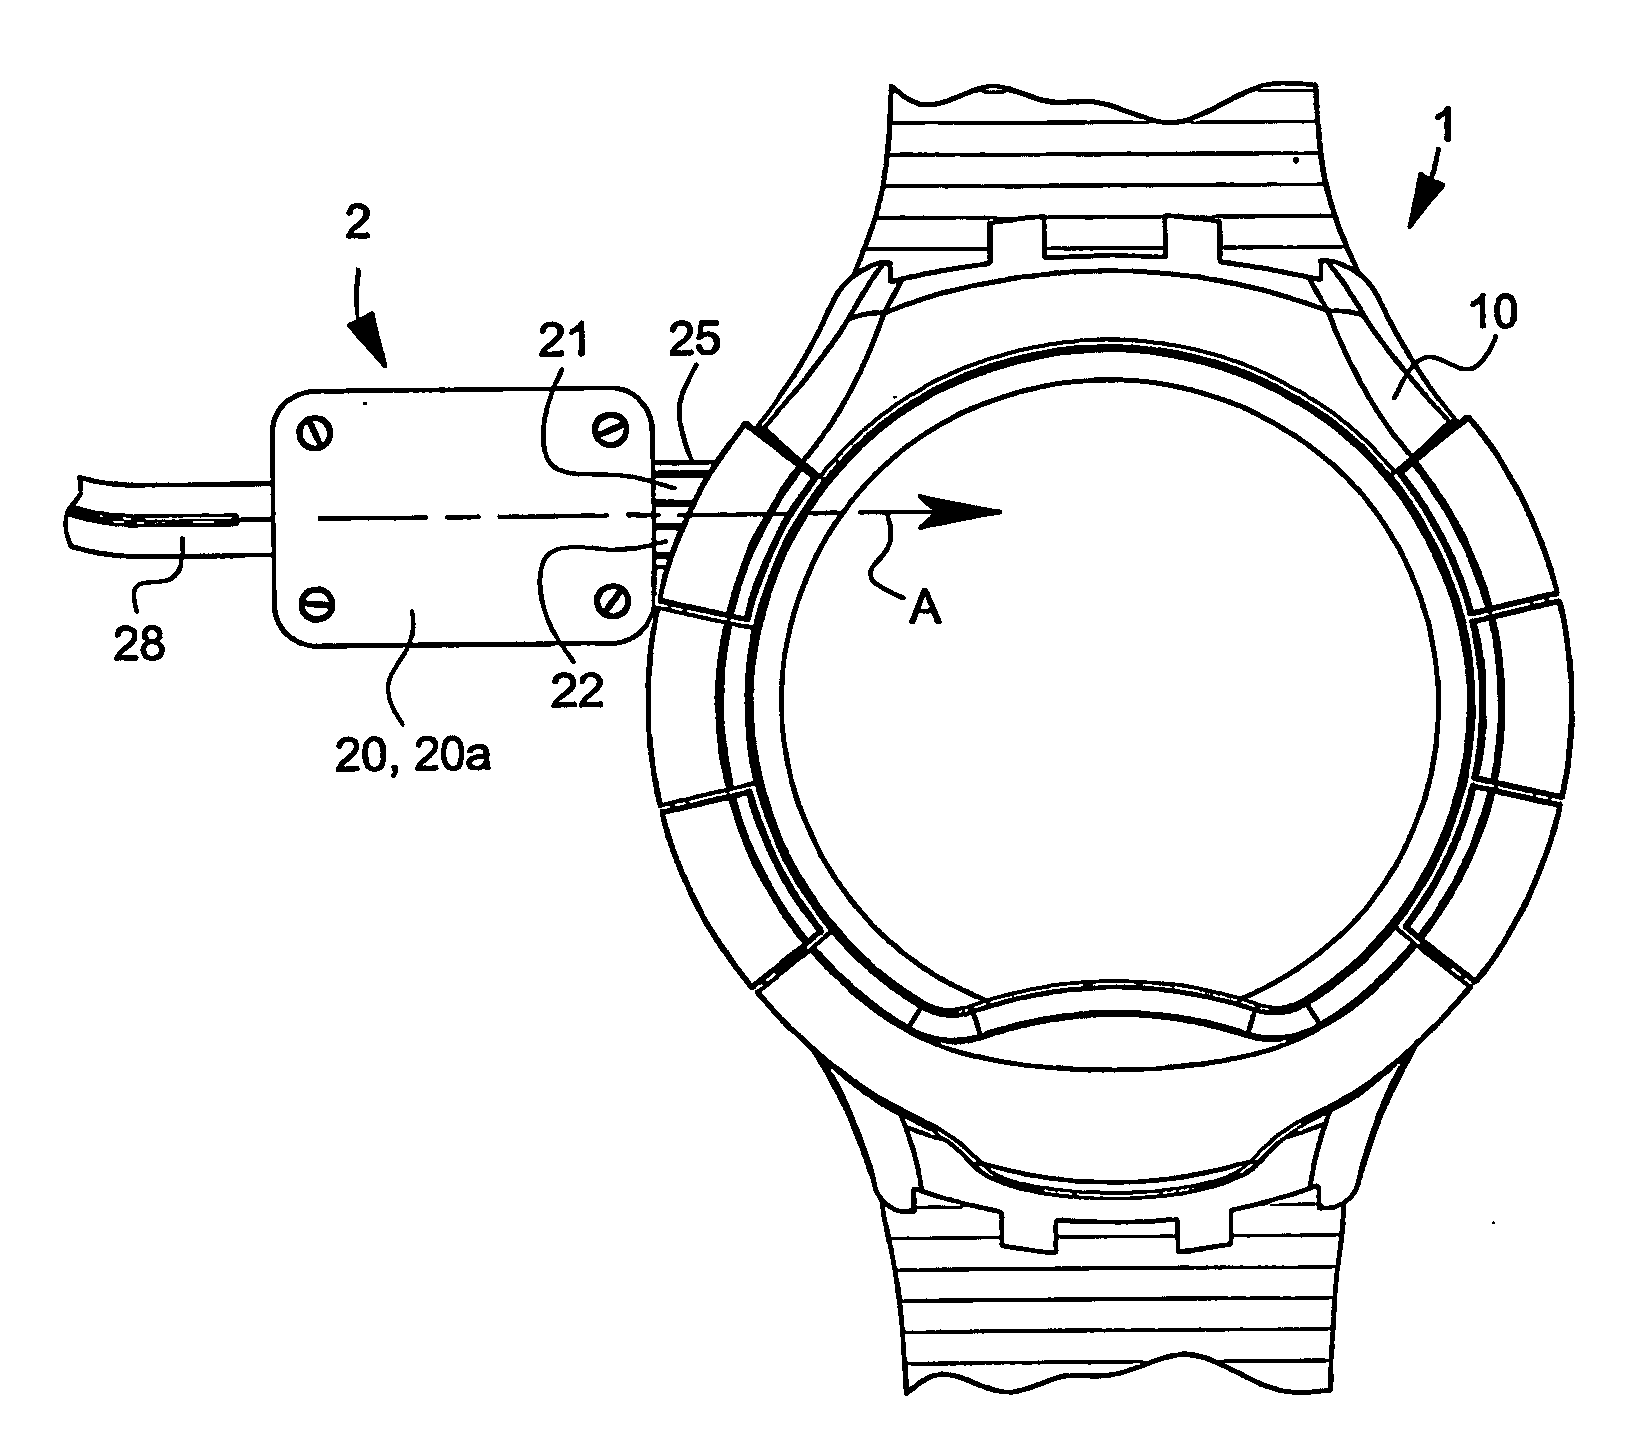 Device for establishing an electrical connection between a portable electronic instrument and an external device, in particular for performing the recharge of a battery of said instrument